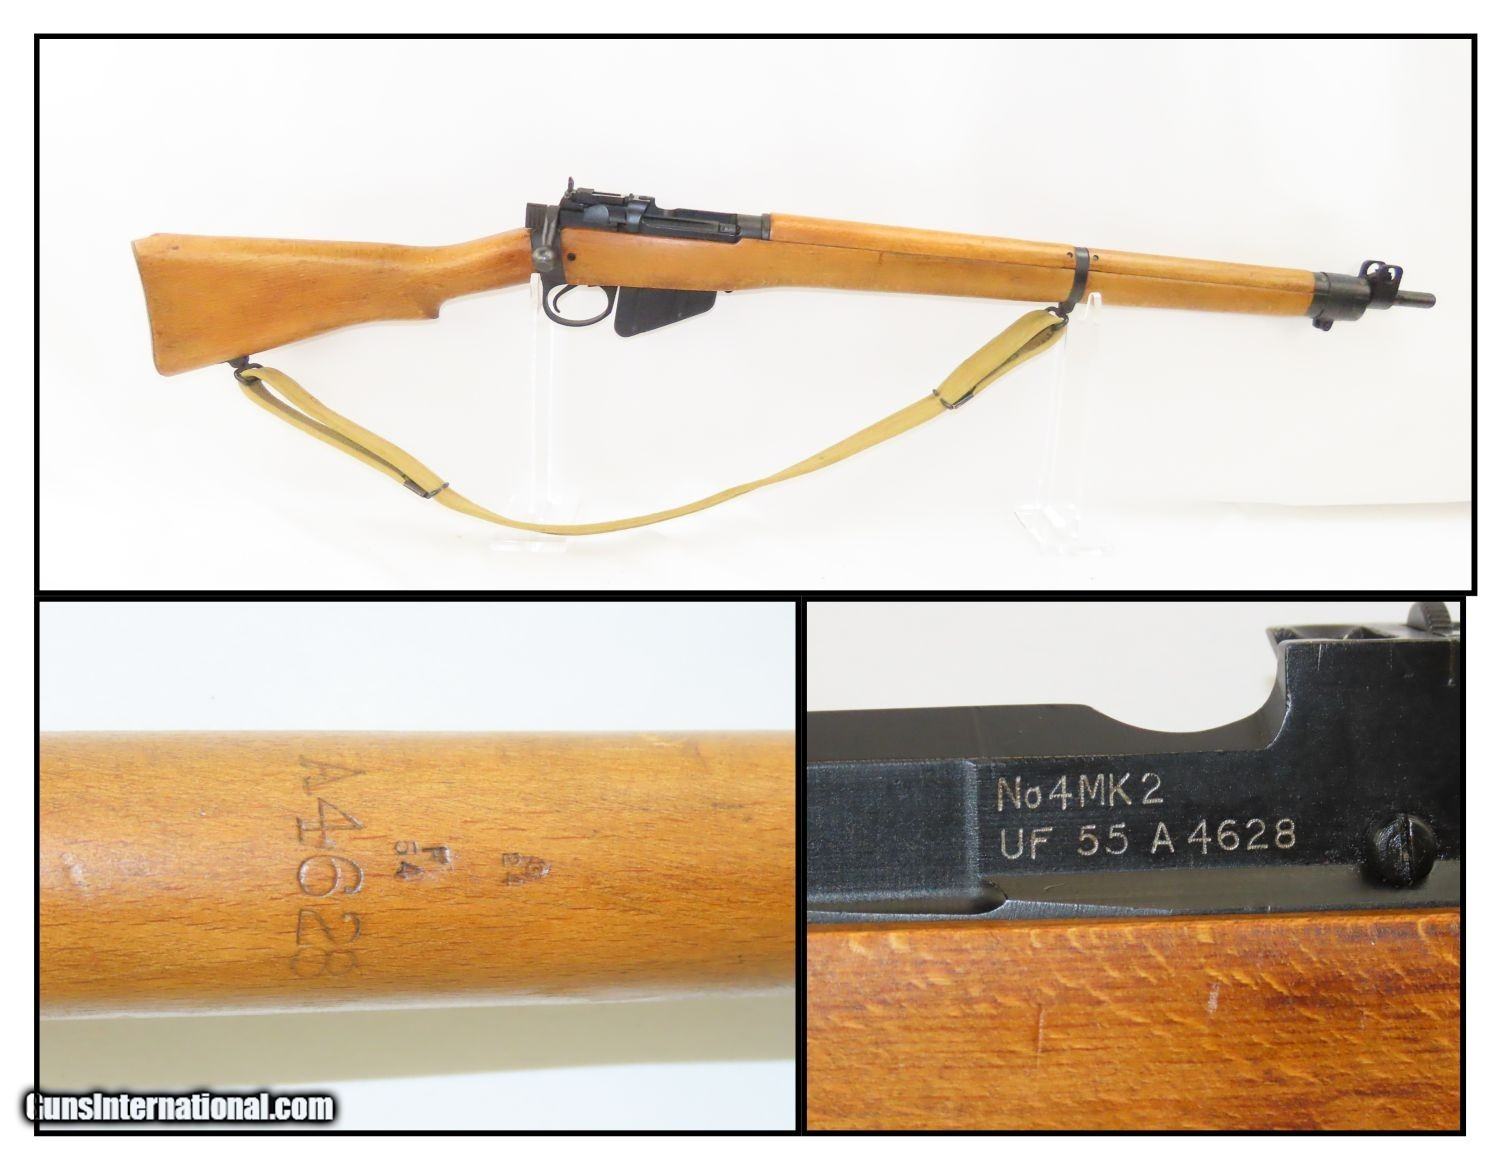 Enfield No. 4 MK 2 for Sale